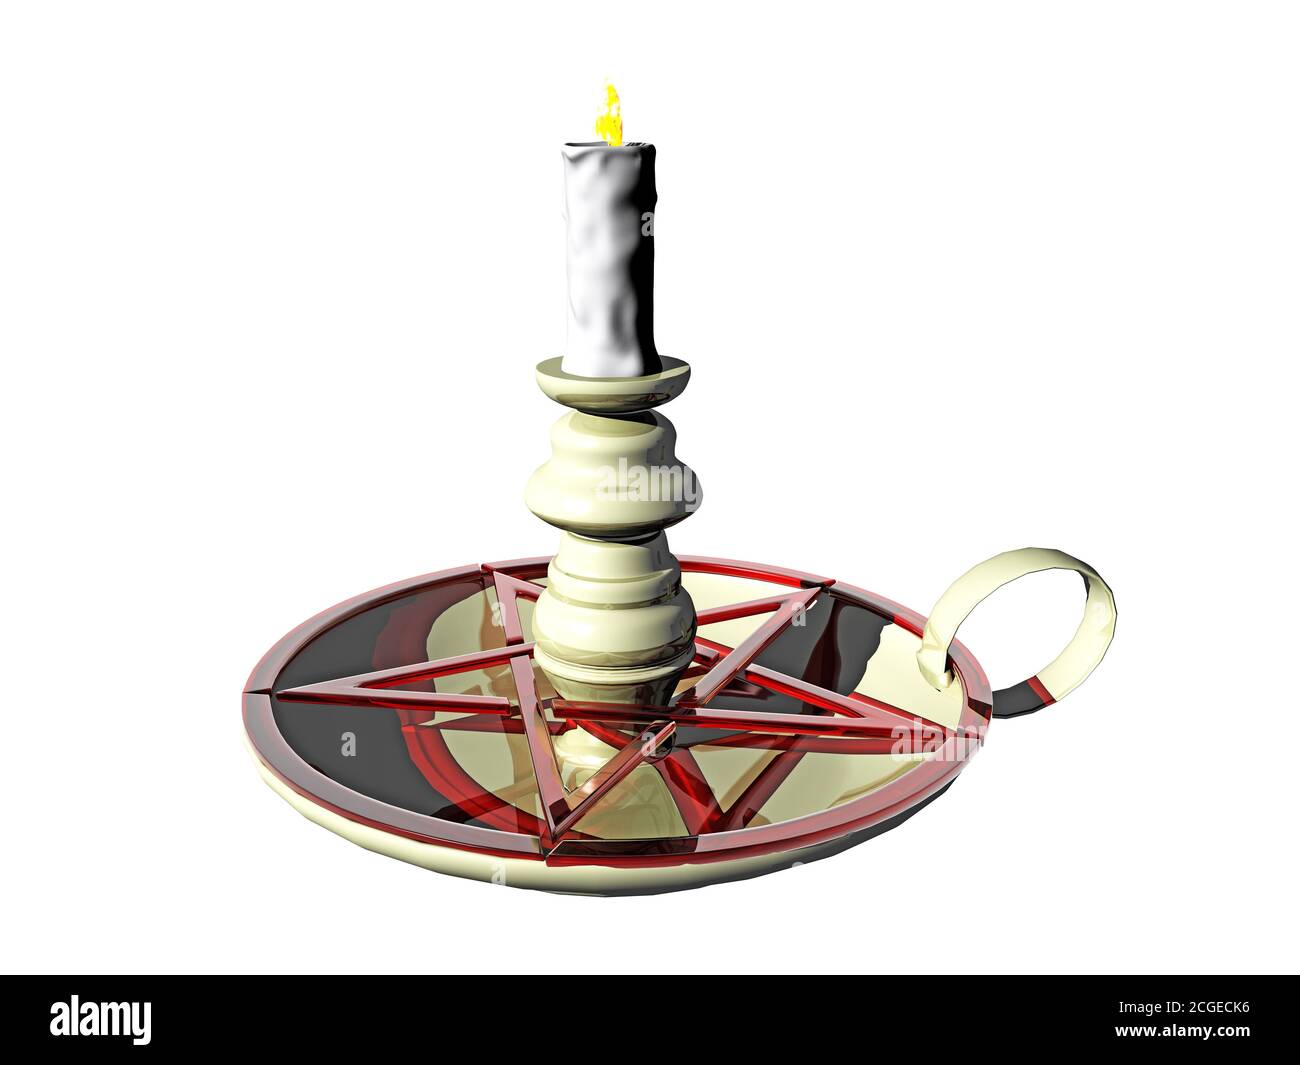 Candle with Flame Stock Photo